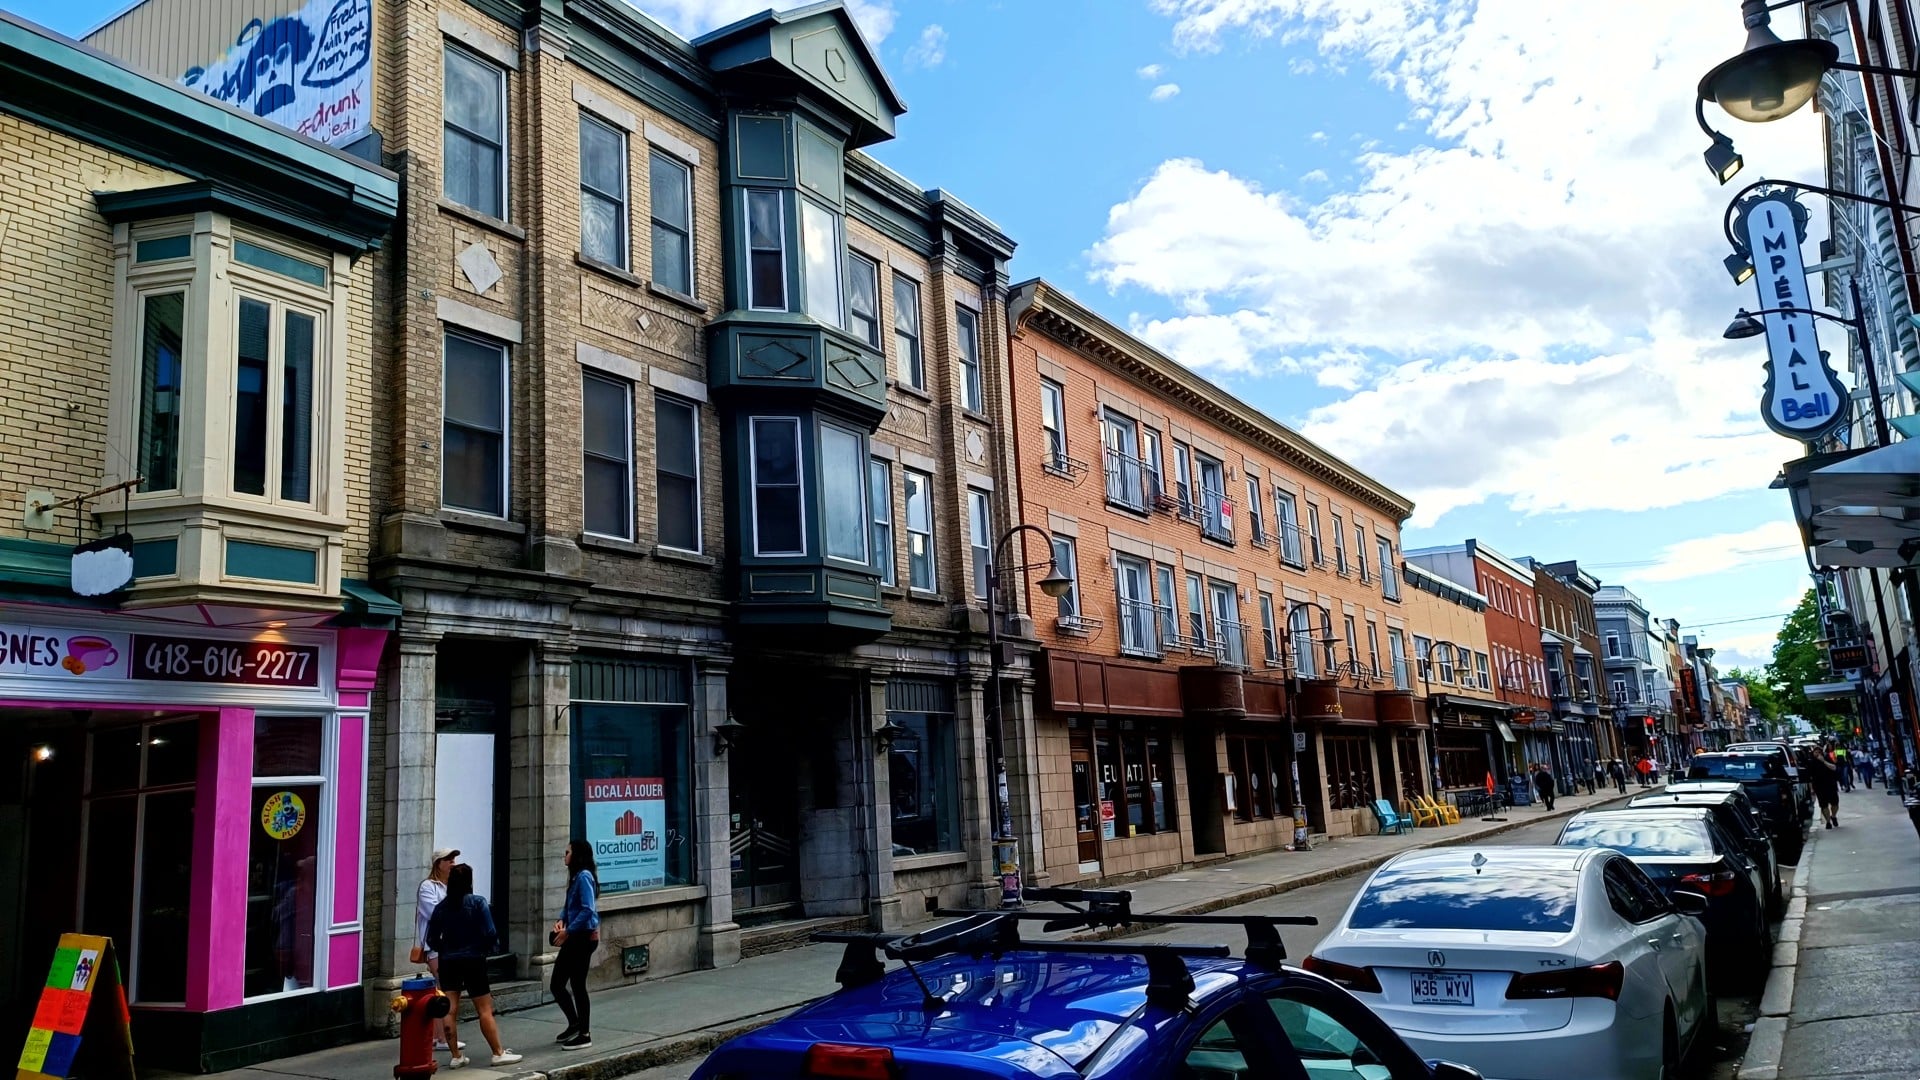 Located directly west of the Old Town, St-Jean-Baptiste is a bohemian, young and vibrant area packed with shops, restaurants and nigthlife venues